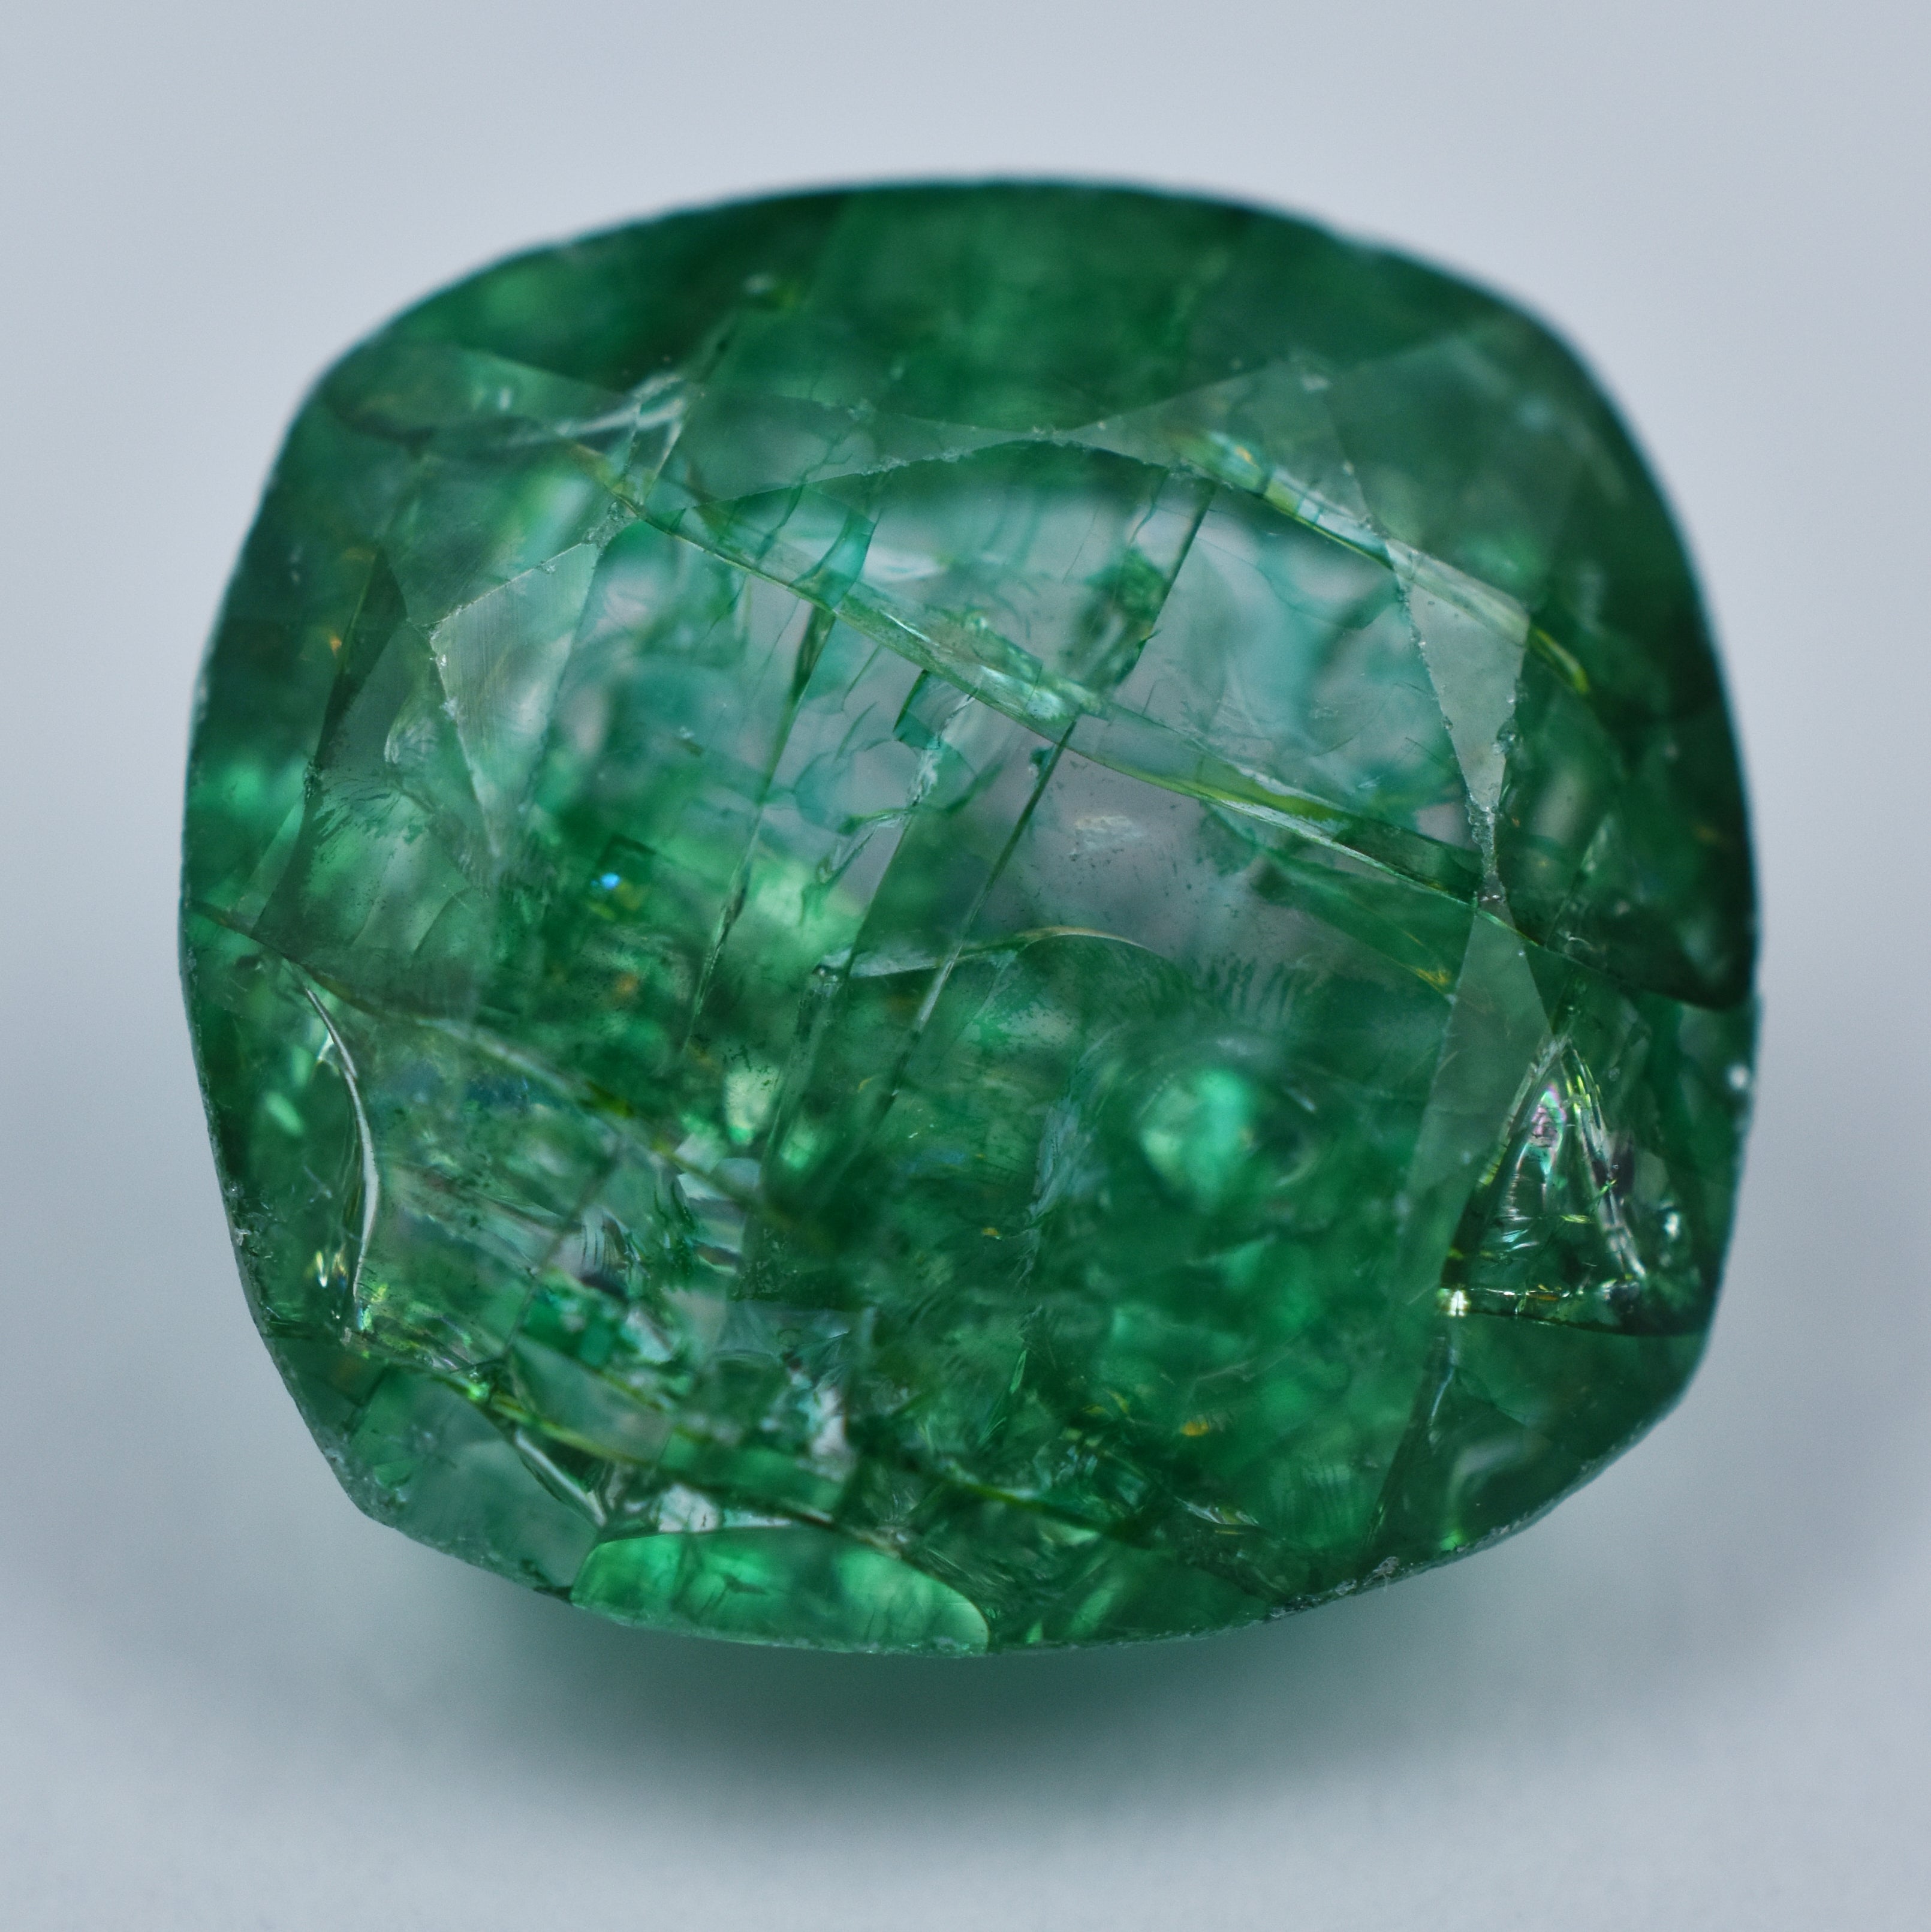 Green Emerald Square Cushion Cut 9.56 Carat Natural CERTIFIED Loose Gemstone | Free Delivery Free Gift | Summer's Offer